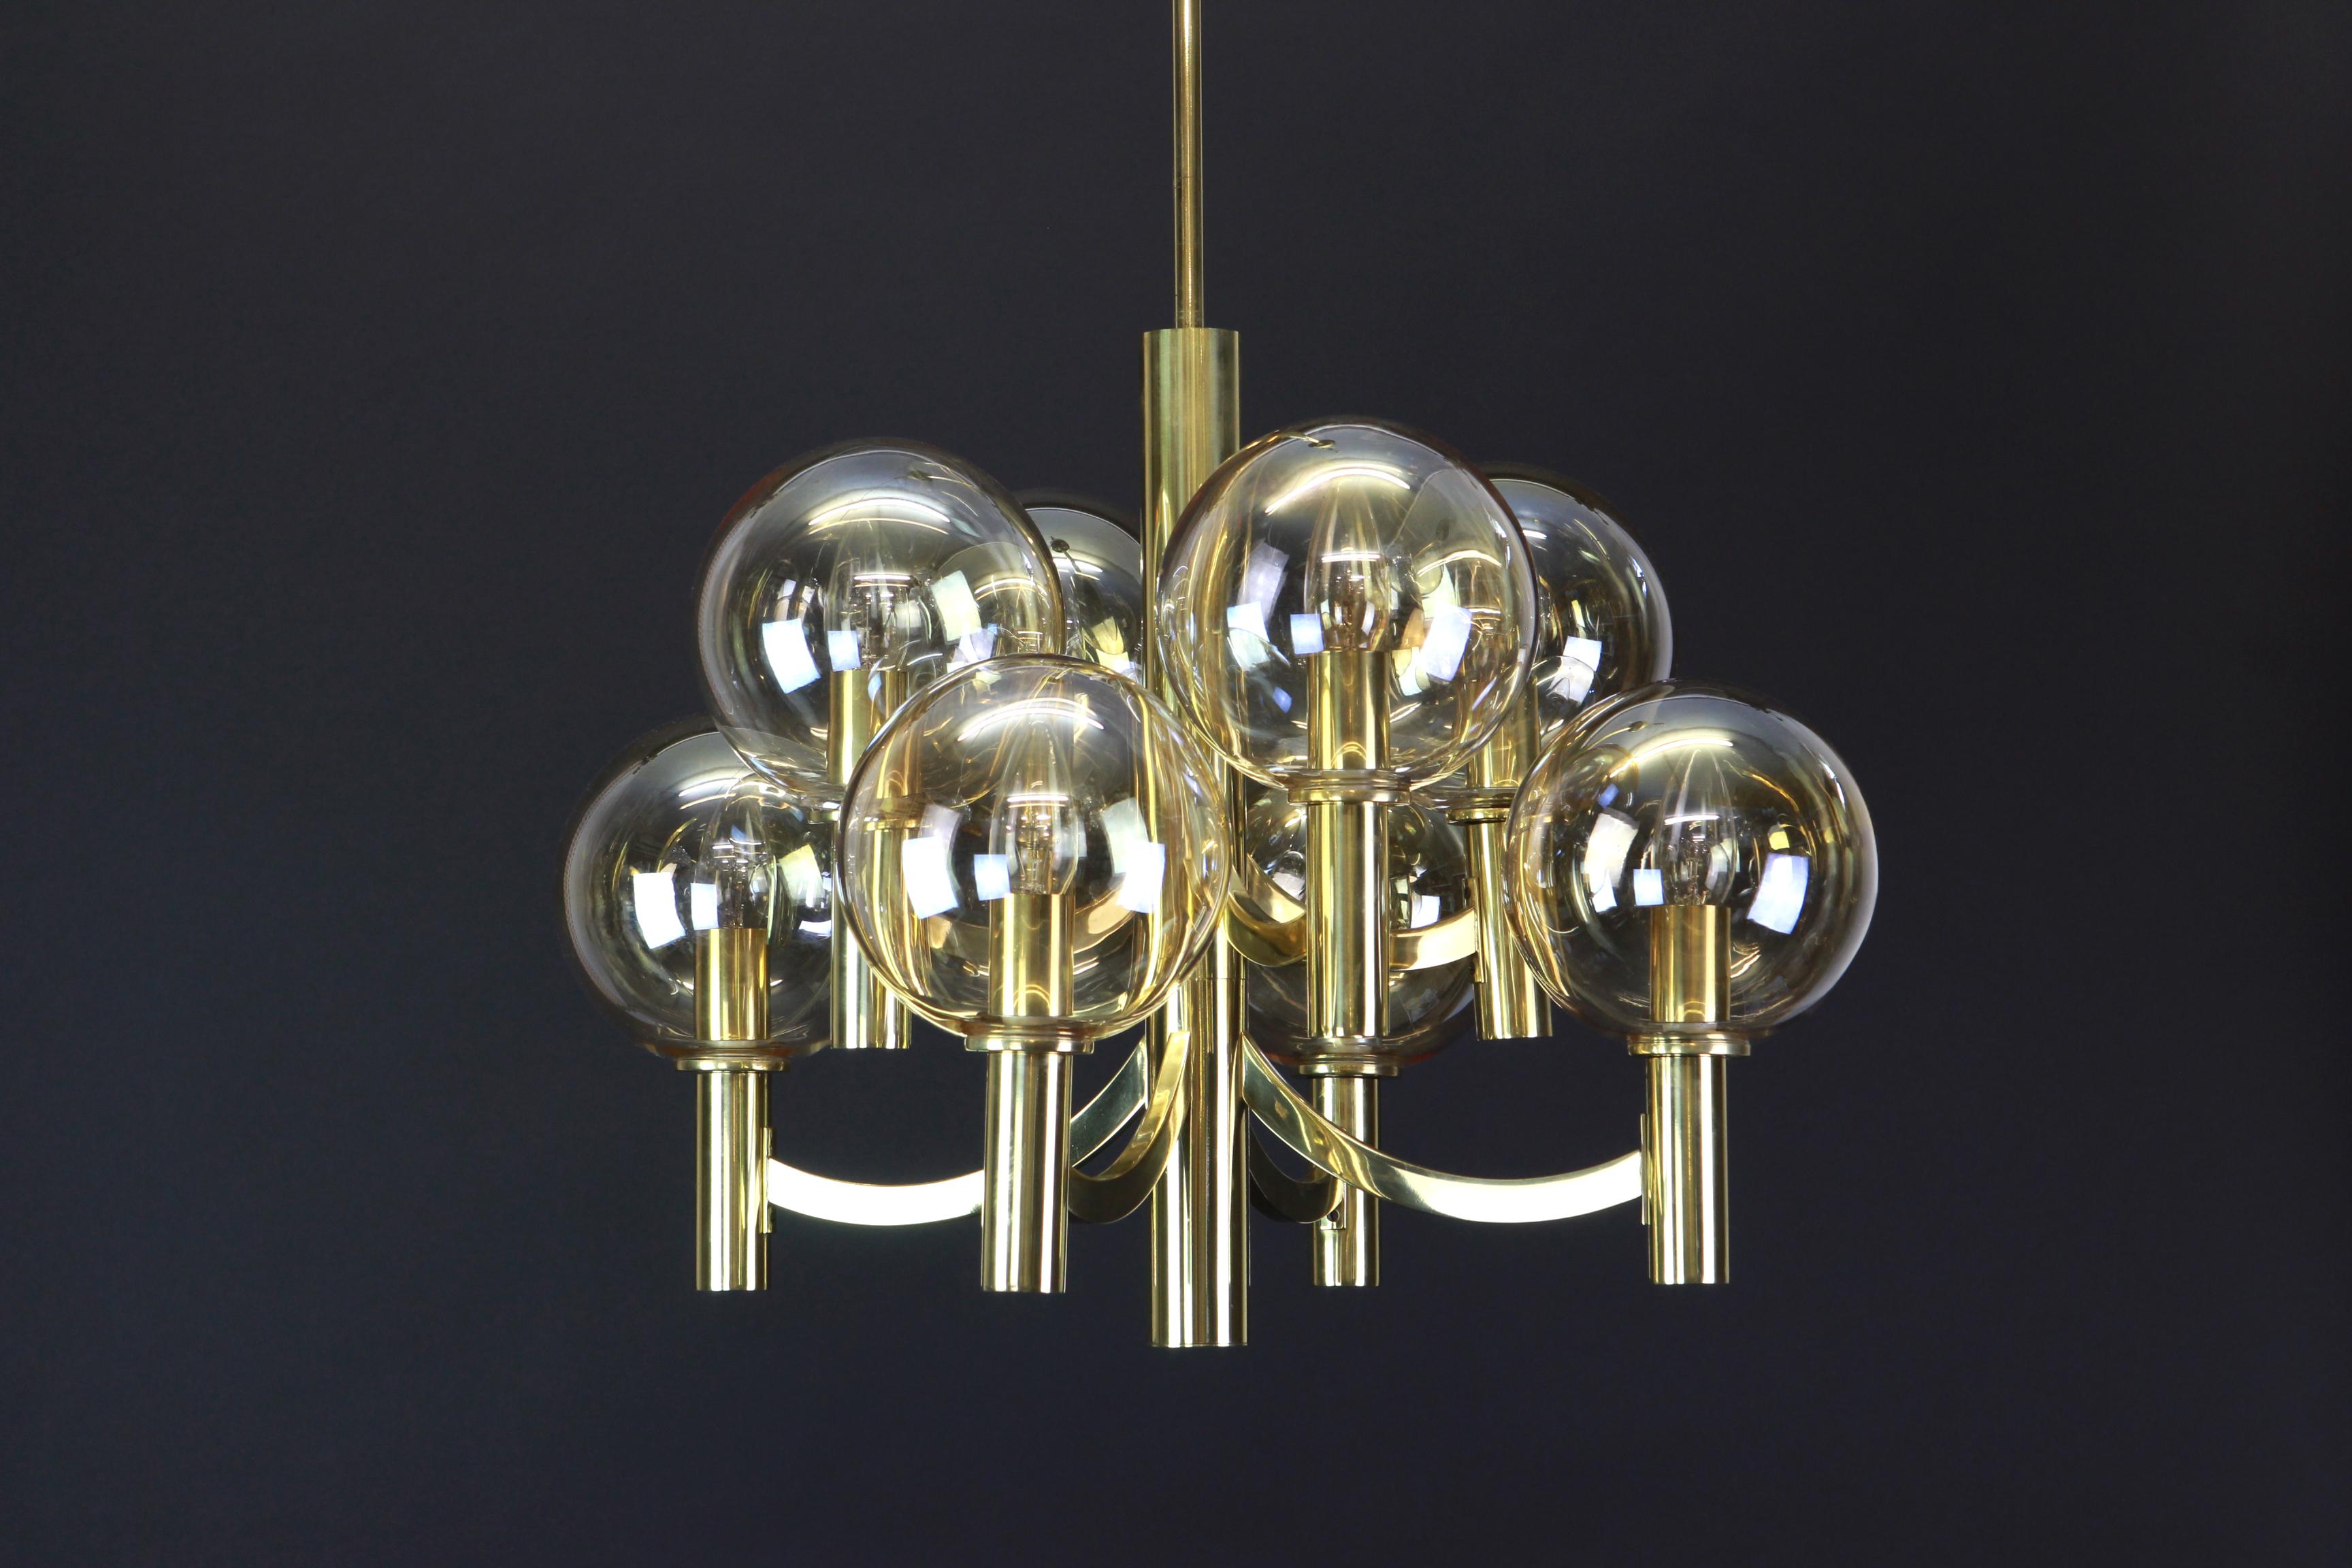 Stunning Sputnik brass chandelier with eight smoked glass globes by Kaiser Leuchten, Germany, 1960s.

Heavy quality and in very good condition. Cleaned, well-wired and ready to use. 

The fixture requires eight E14 Small bulbs with 40W max each